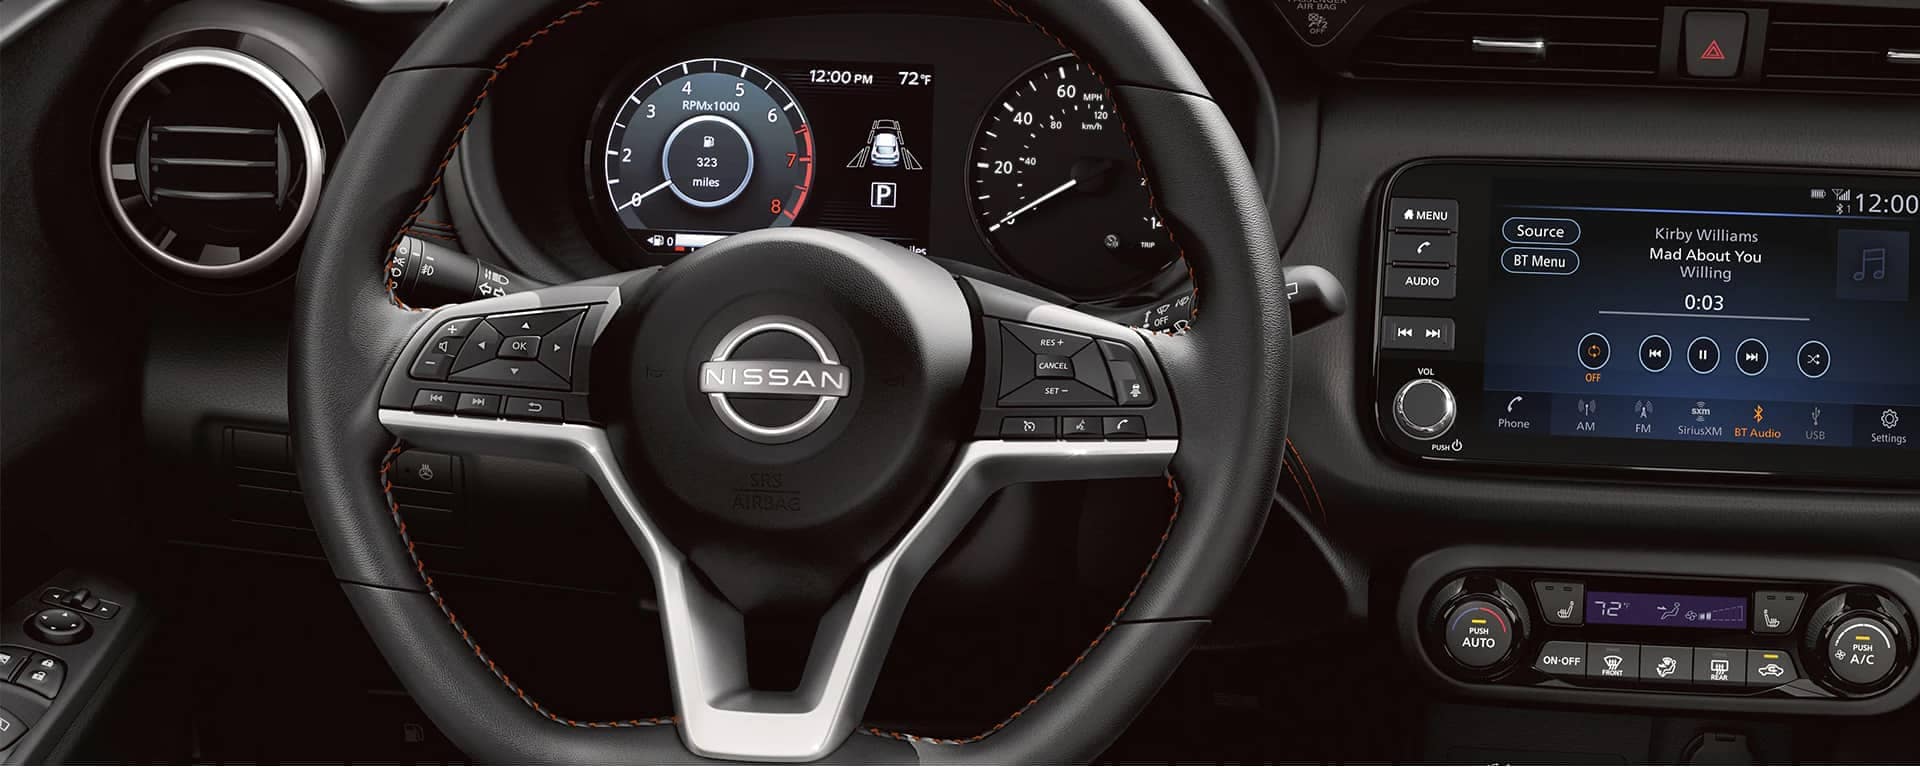 Nissan drivers view of the dashboard